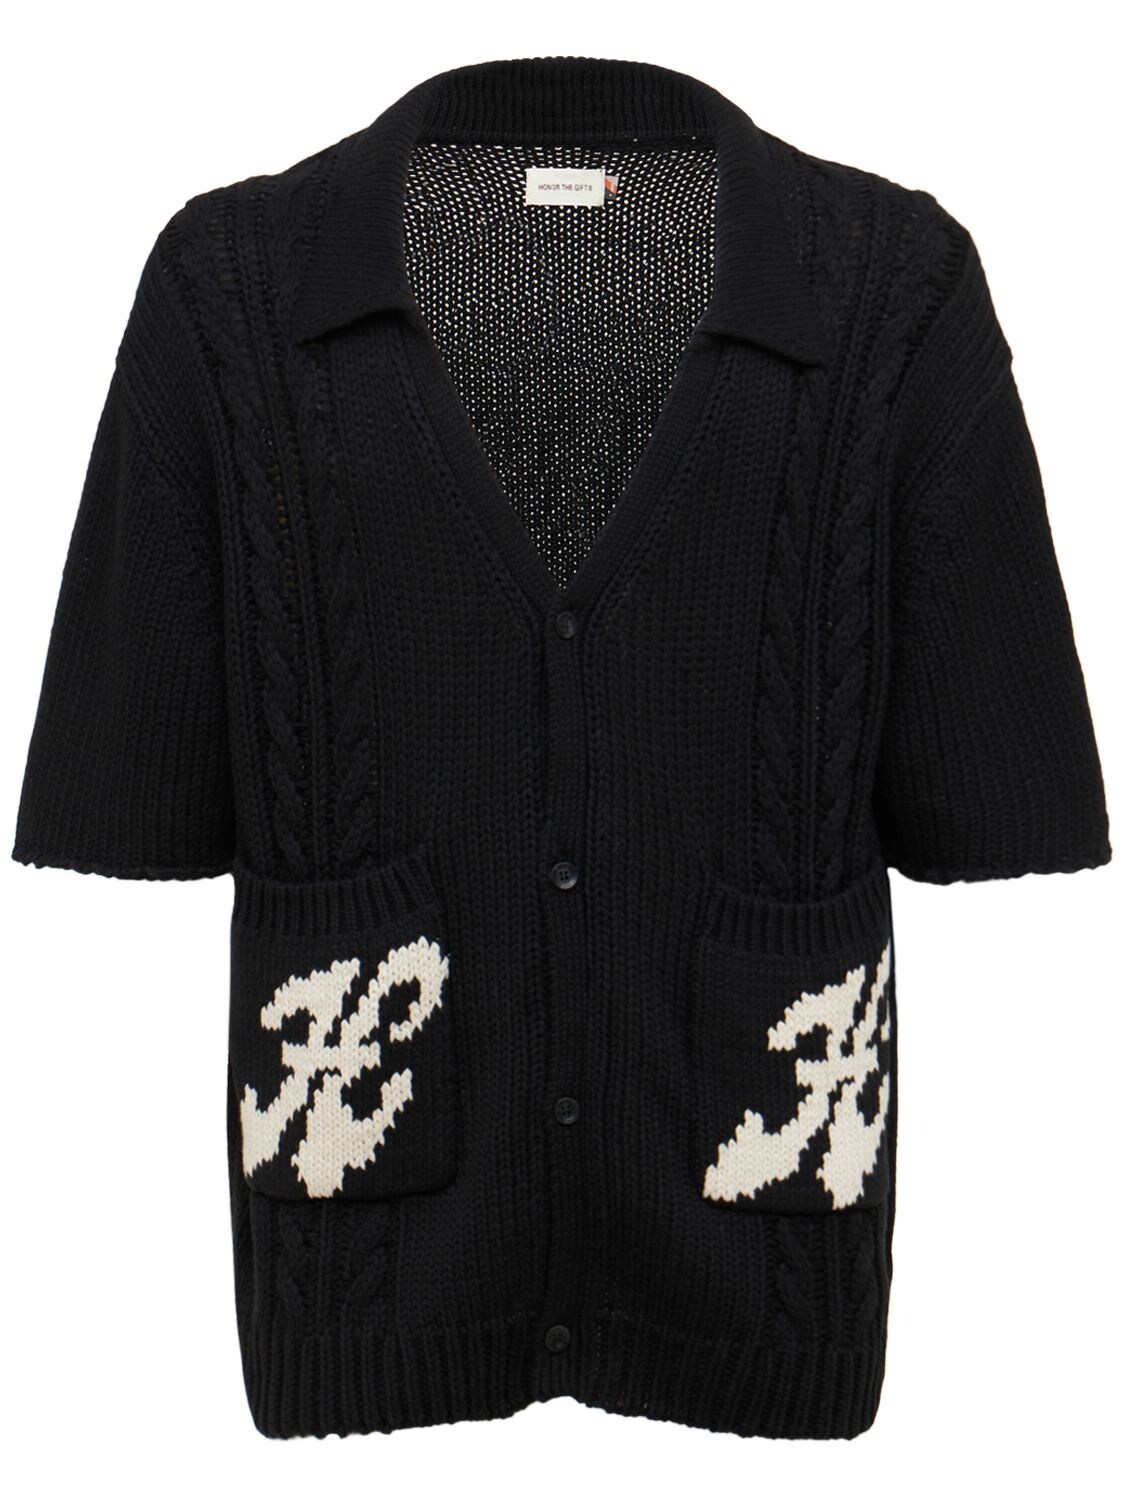 HONOR THE GIFT Dice Cotton & Acrylic Knit Cardigan